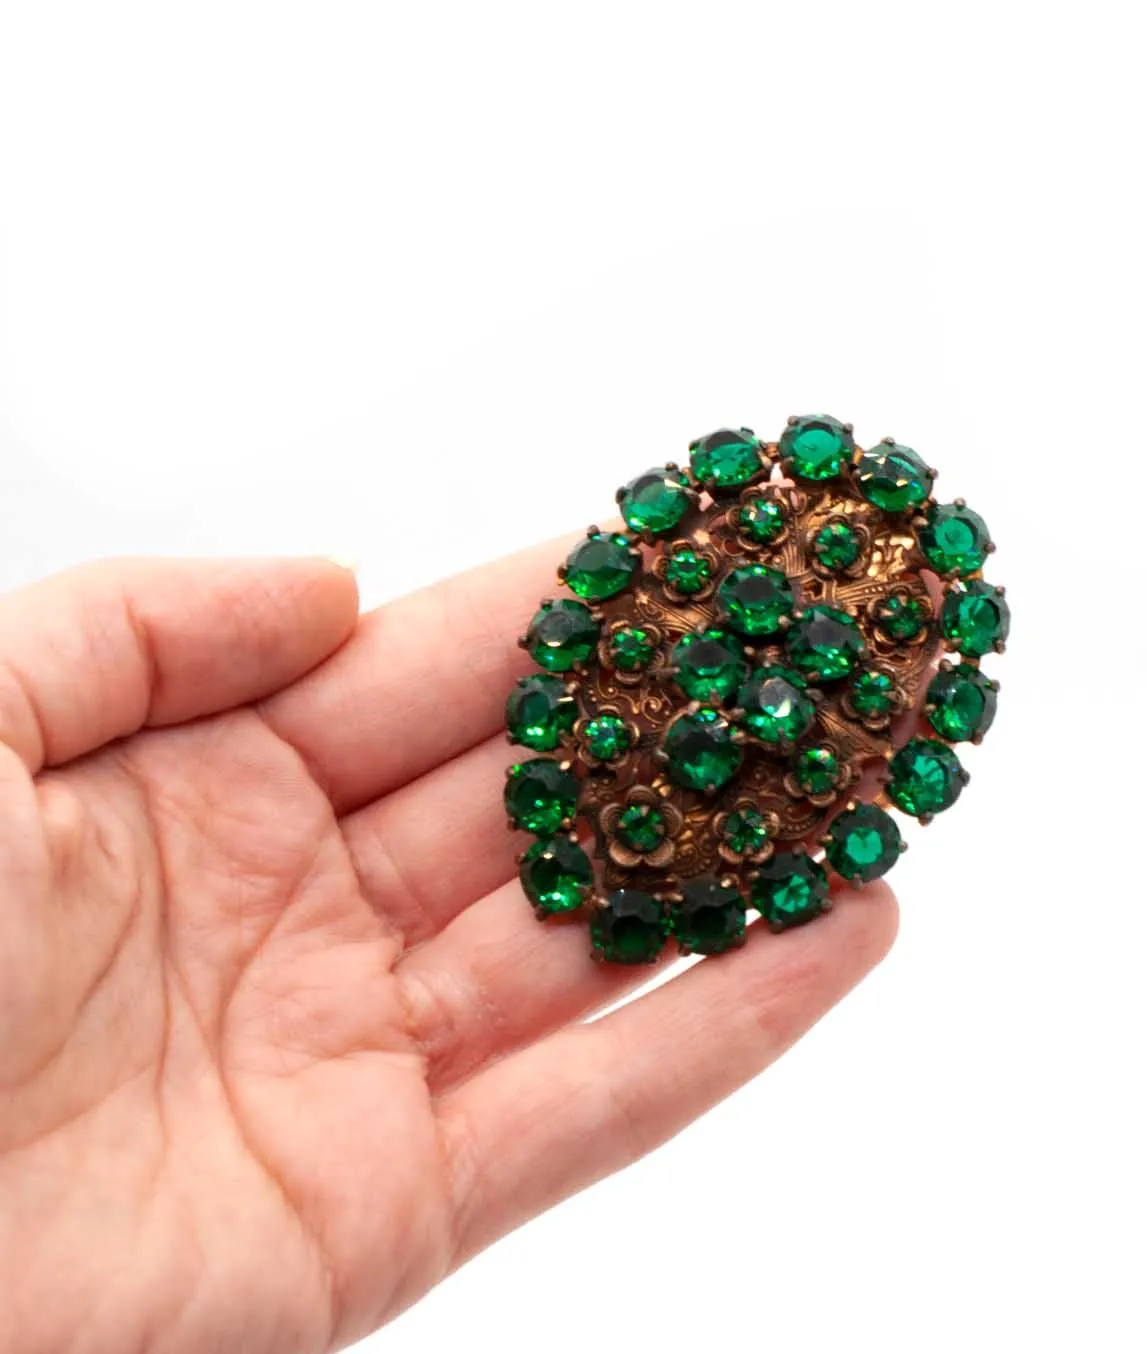 Green and copper Czech dress clip held in hand